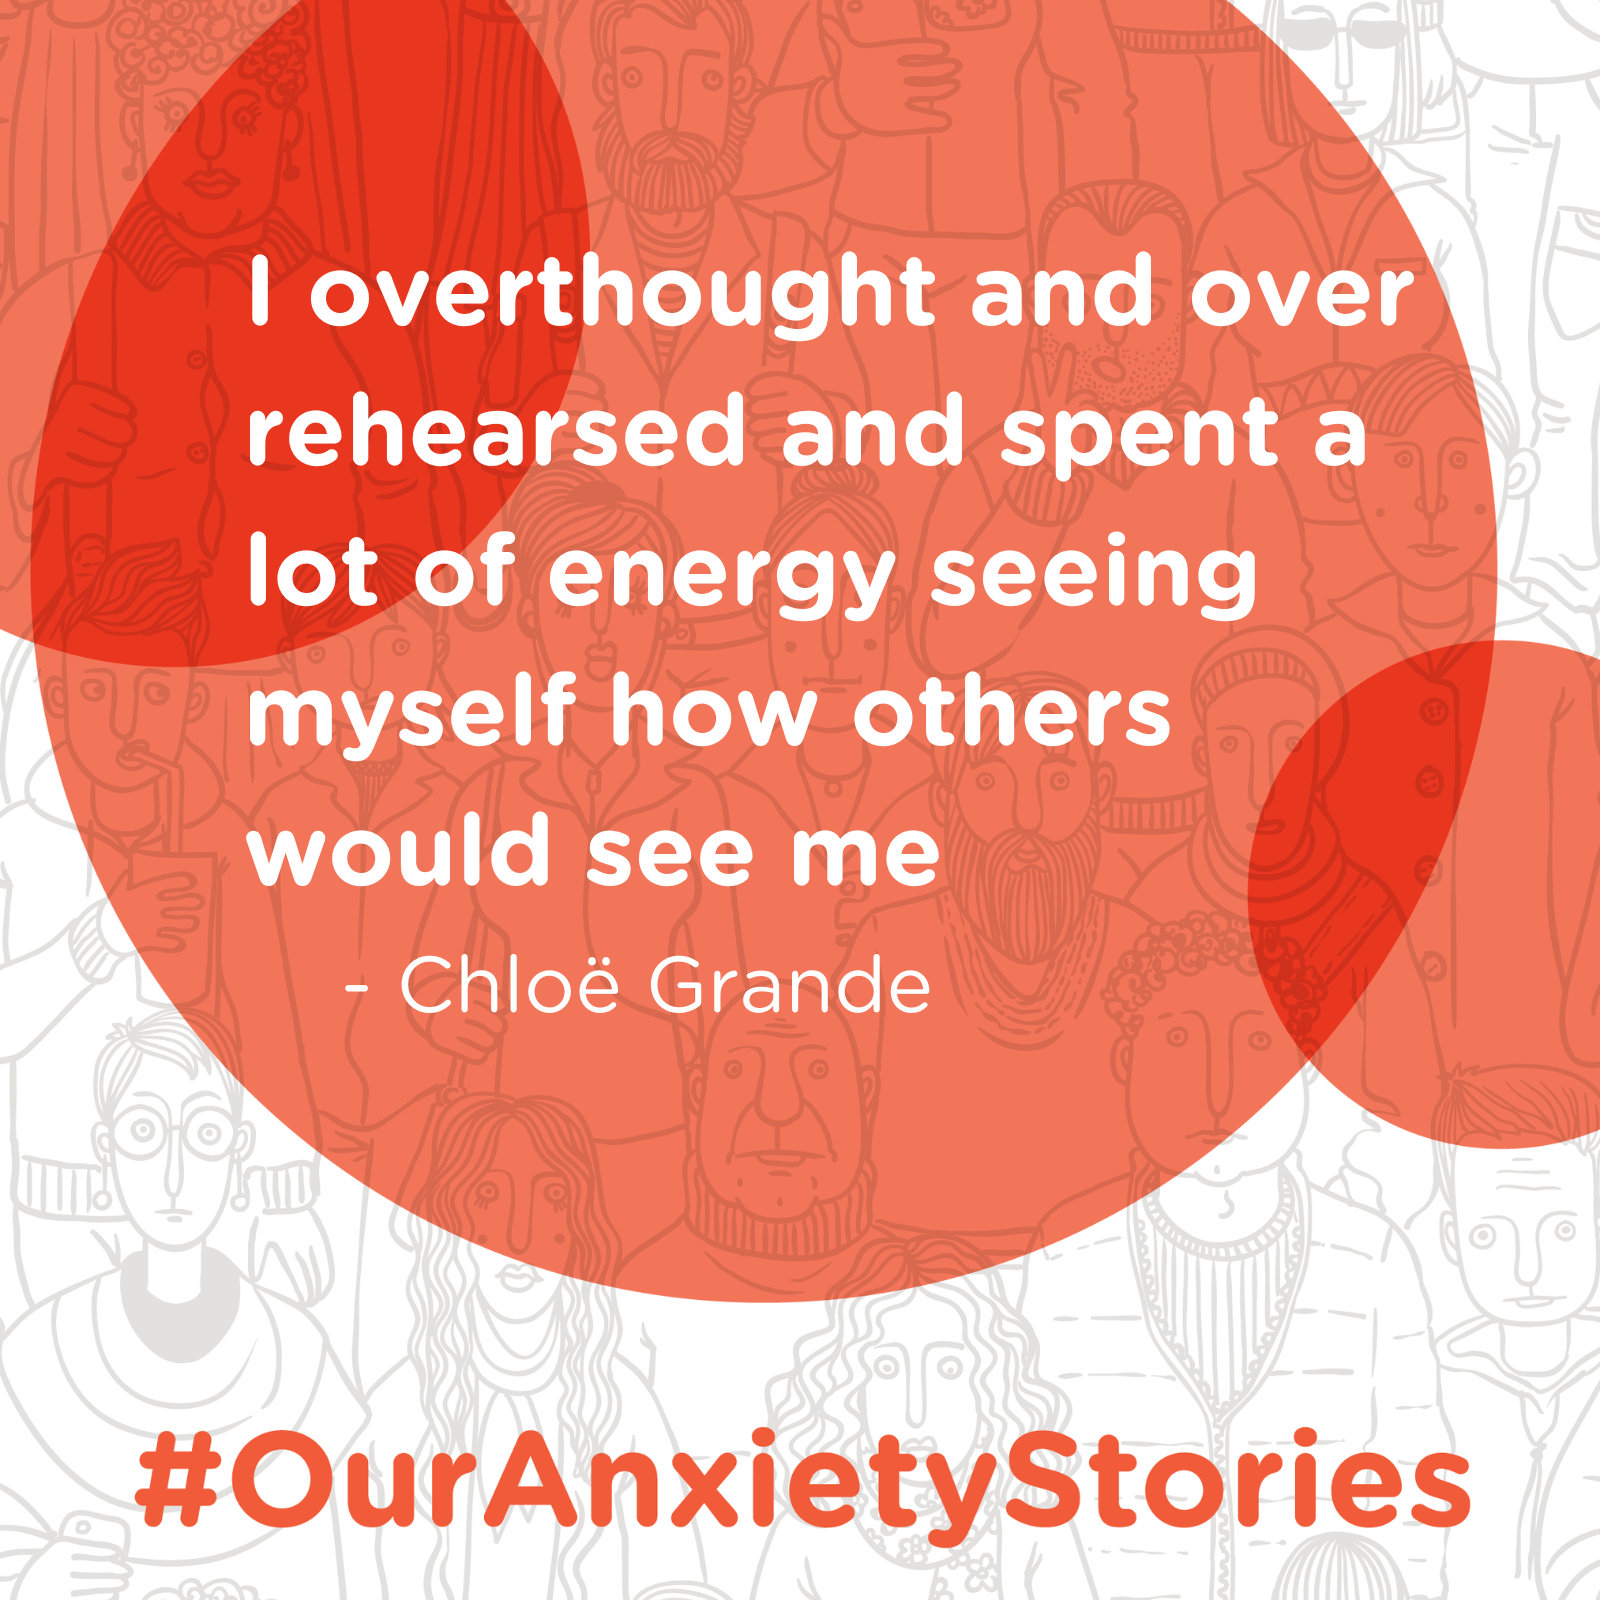 Overcoming Anorexia and Anxiety with Chloë Grande